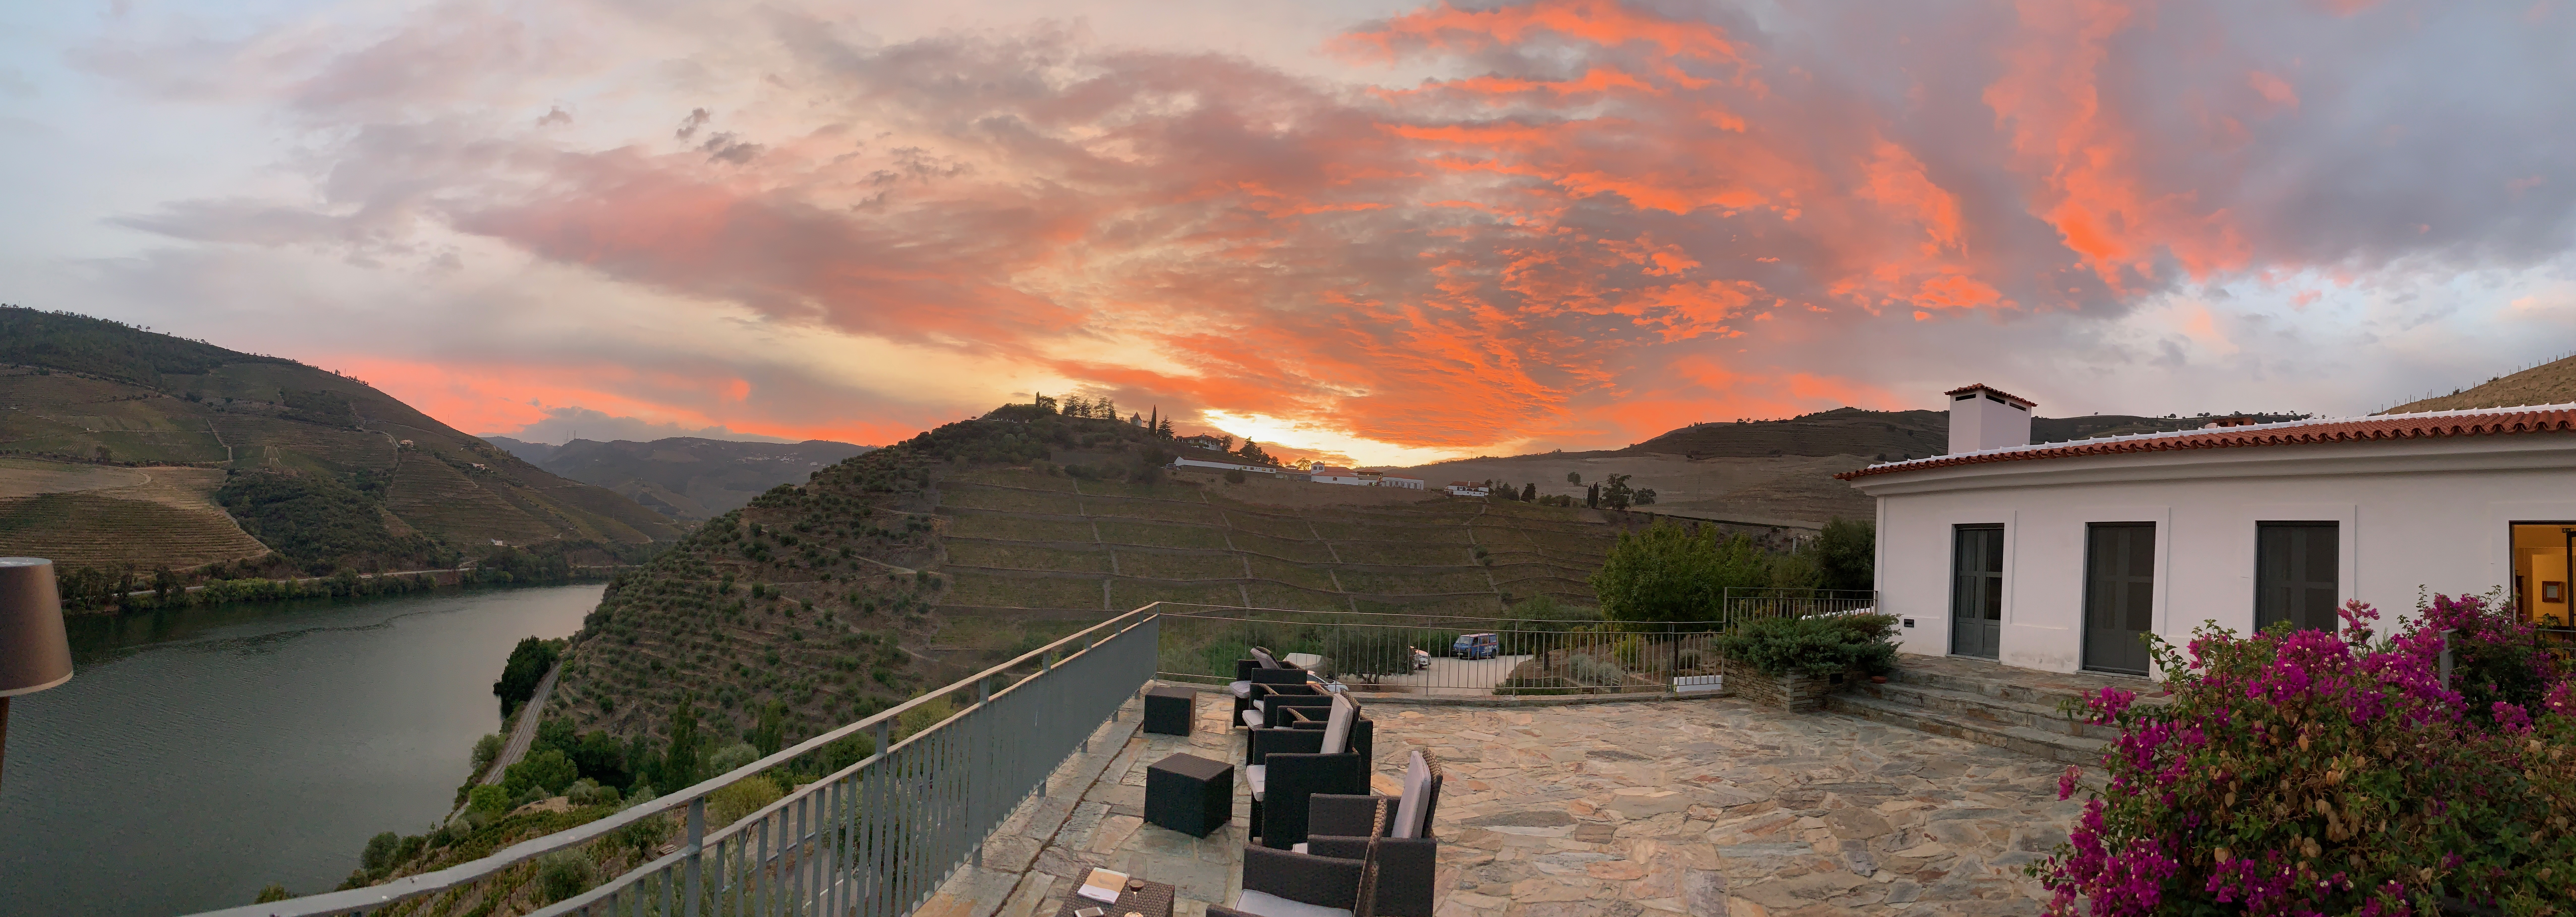 Breathtaking pink and purple sunset in the Douro Valley